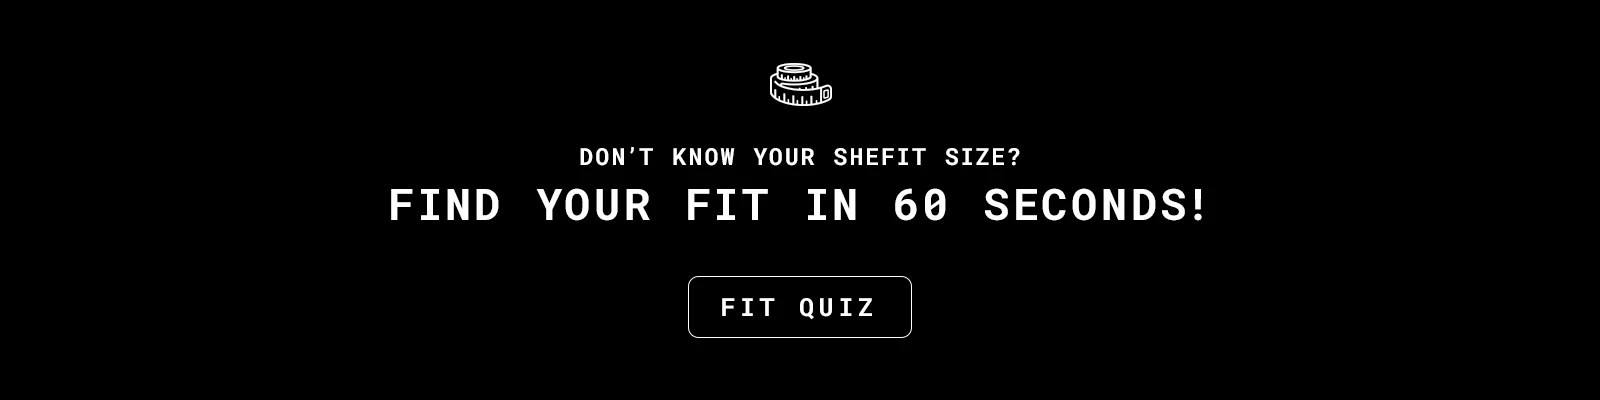 Find your fit in 60 seconds - Fit Quiz